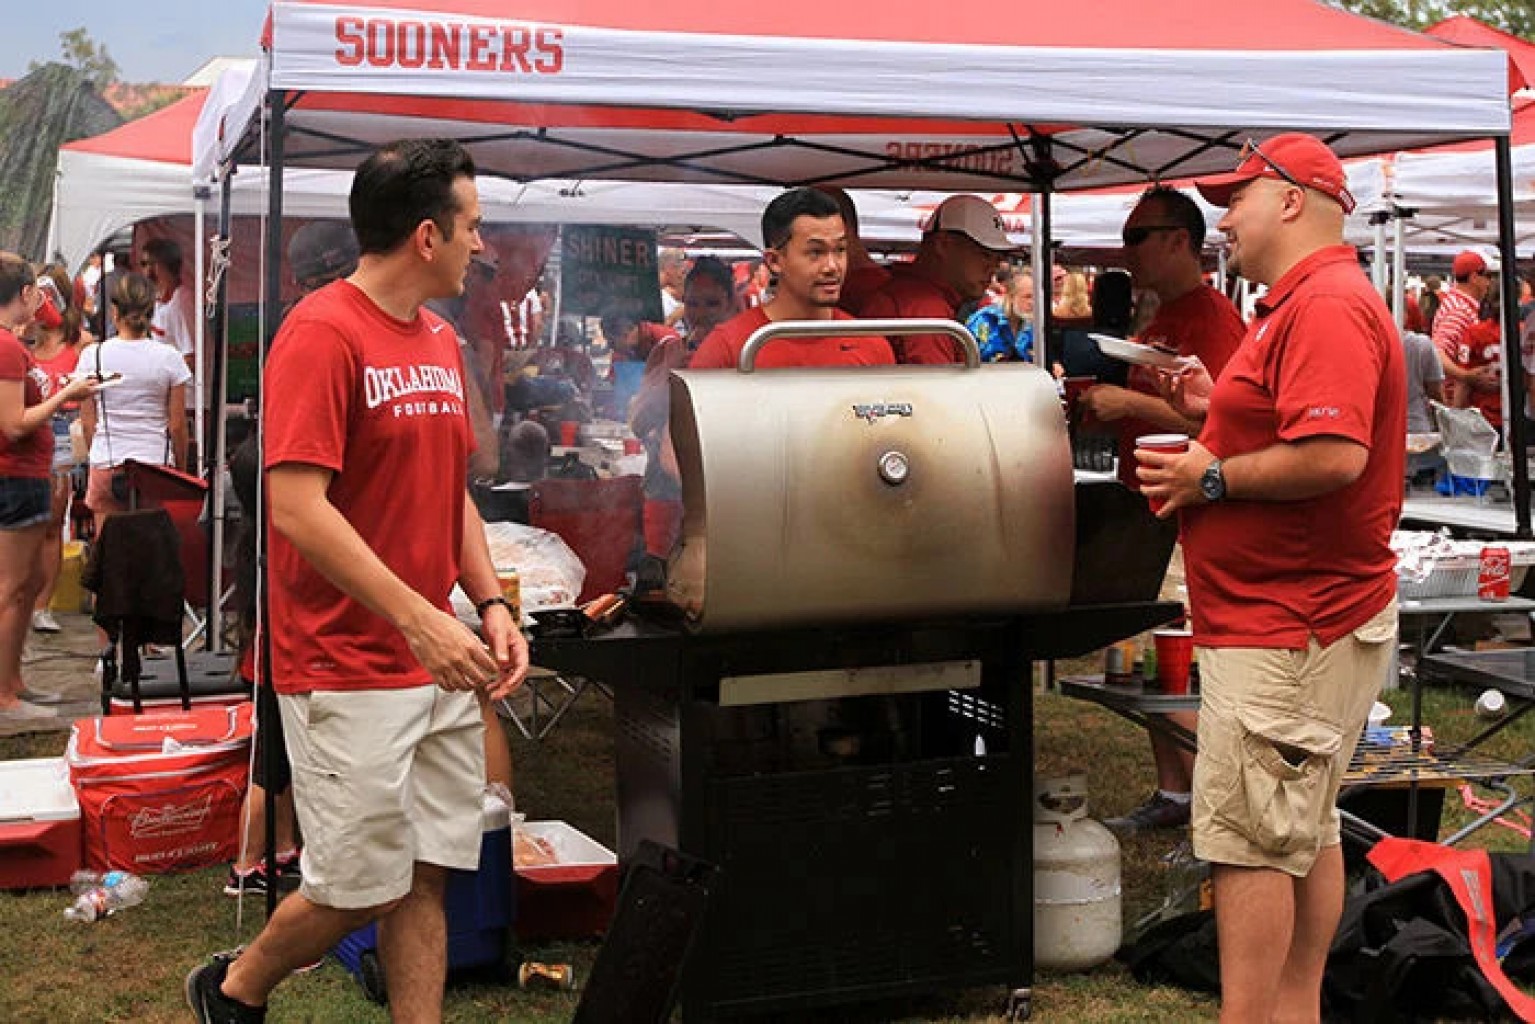 OU Announces Changes to Tailgating  Policies Ahead of 2023 Football Season